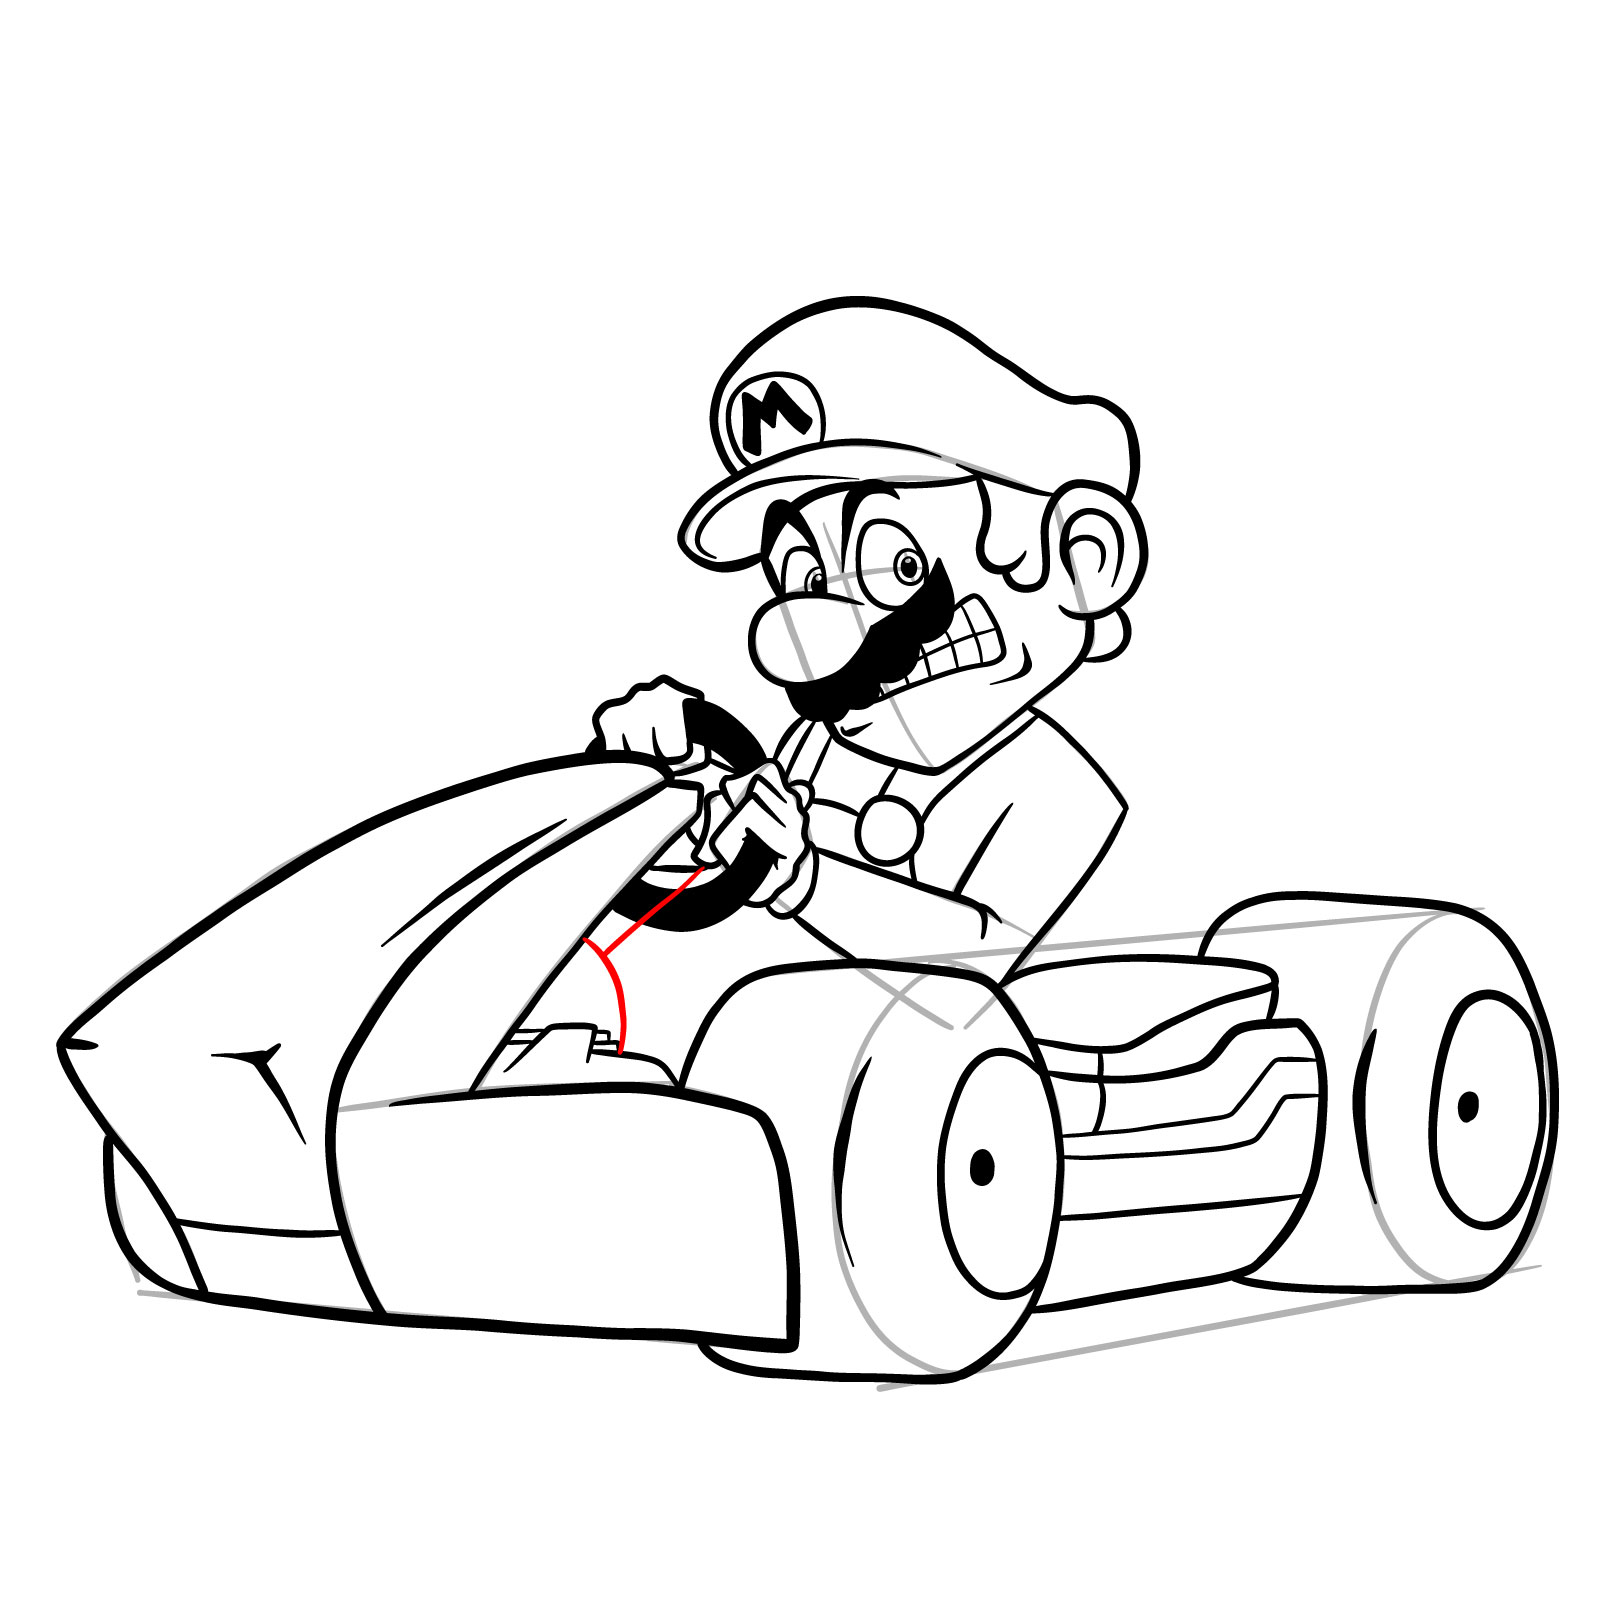 How to draw Race Traitors Mario - step 39